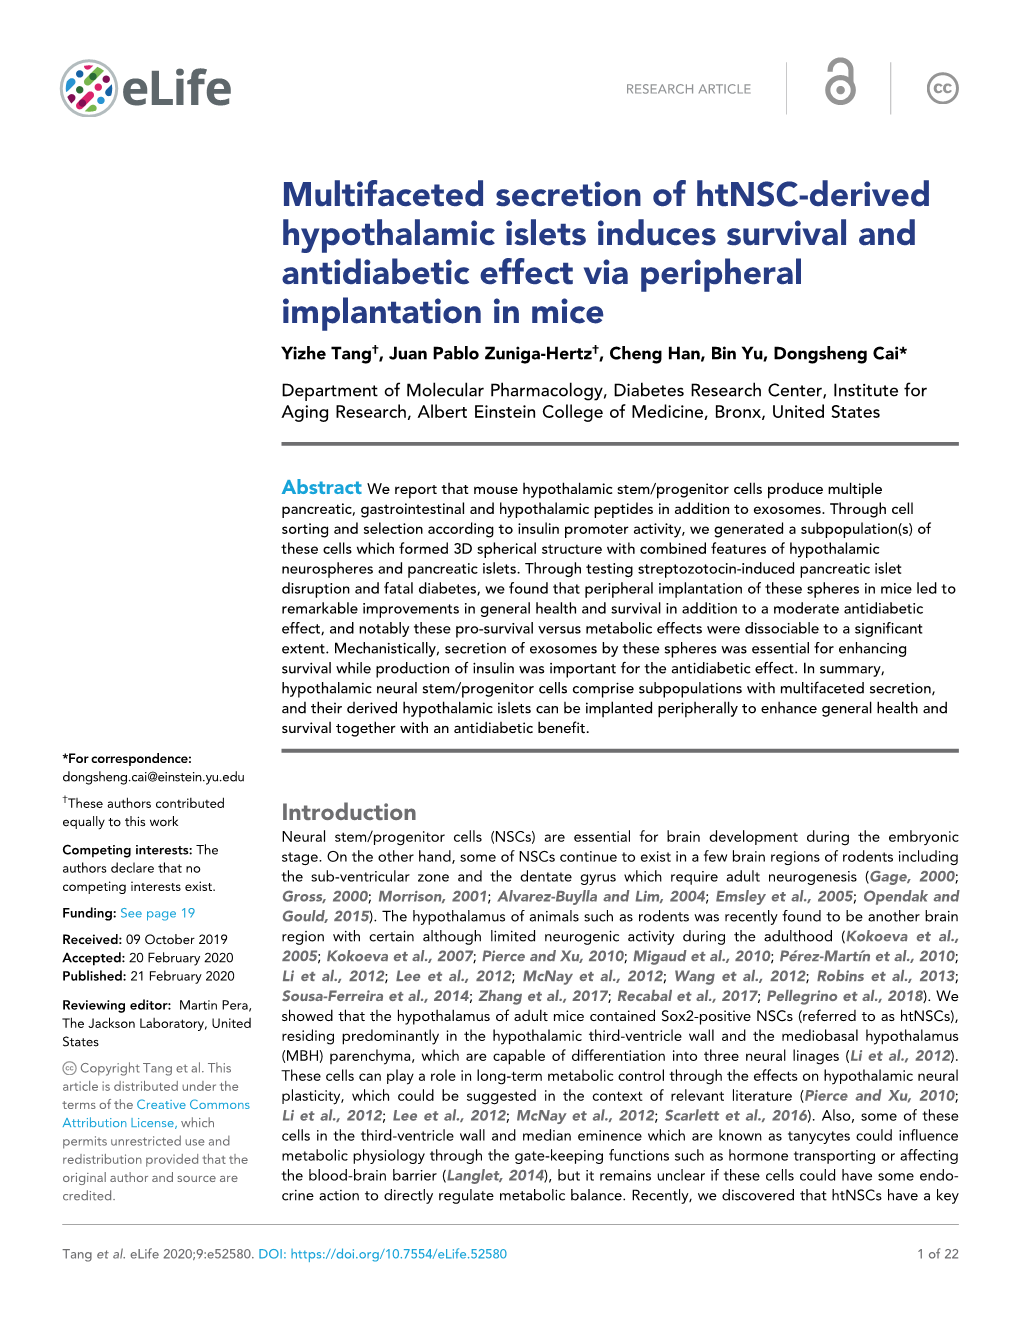 Multifaceted Secretion of Htnsc-Derived Hypothalamic Islets